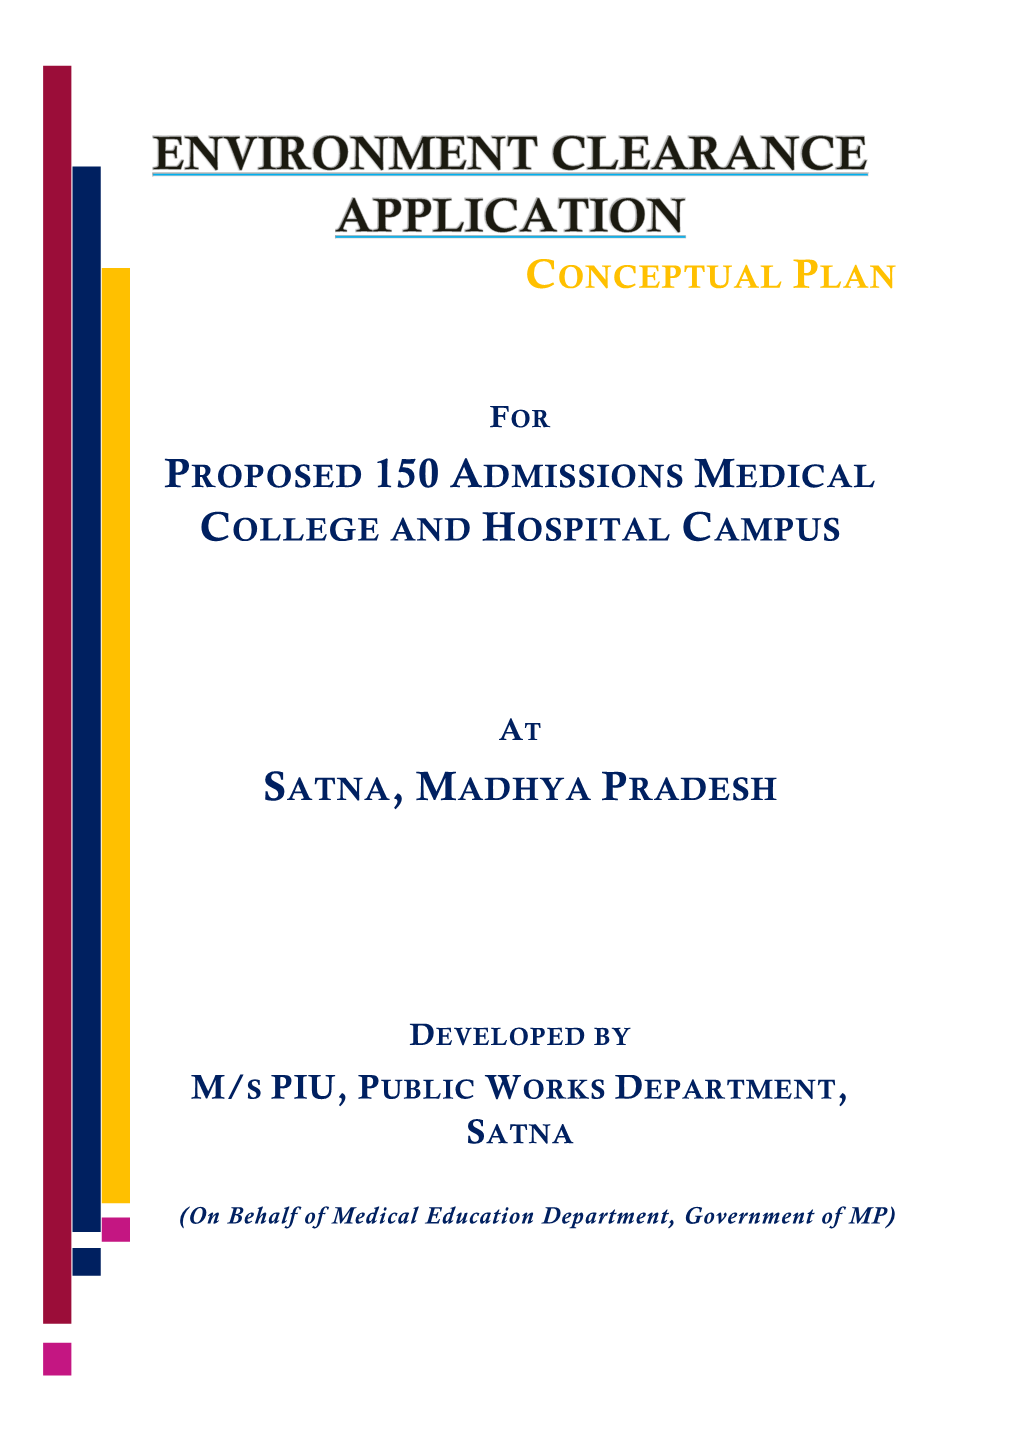 Proposed 150 Admissions Medical College and Hospital Campus